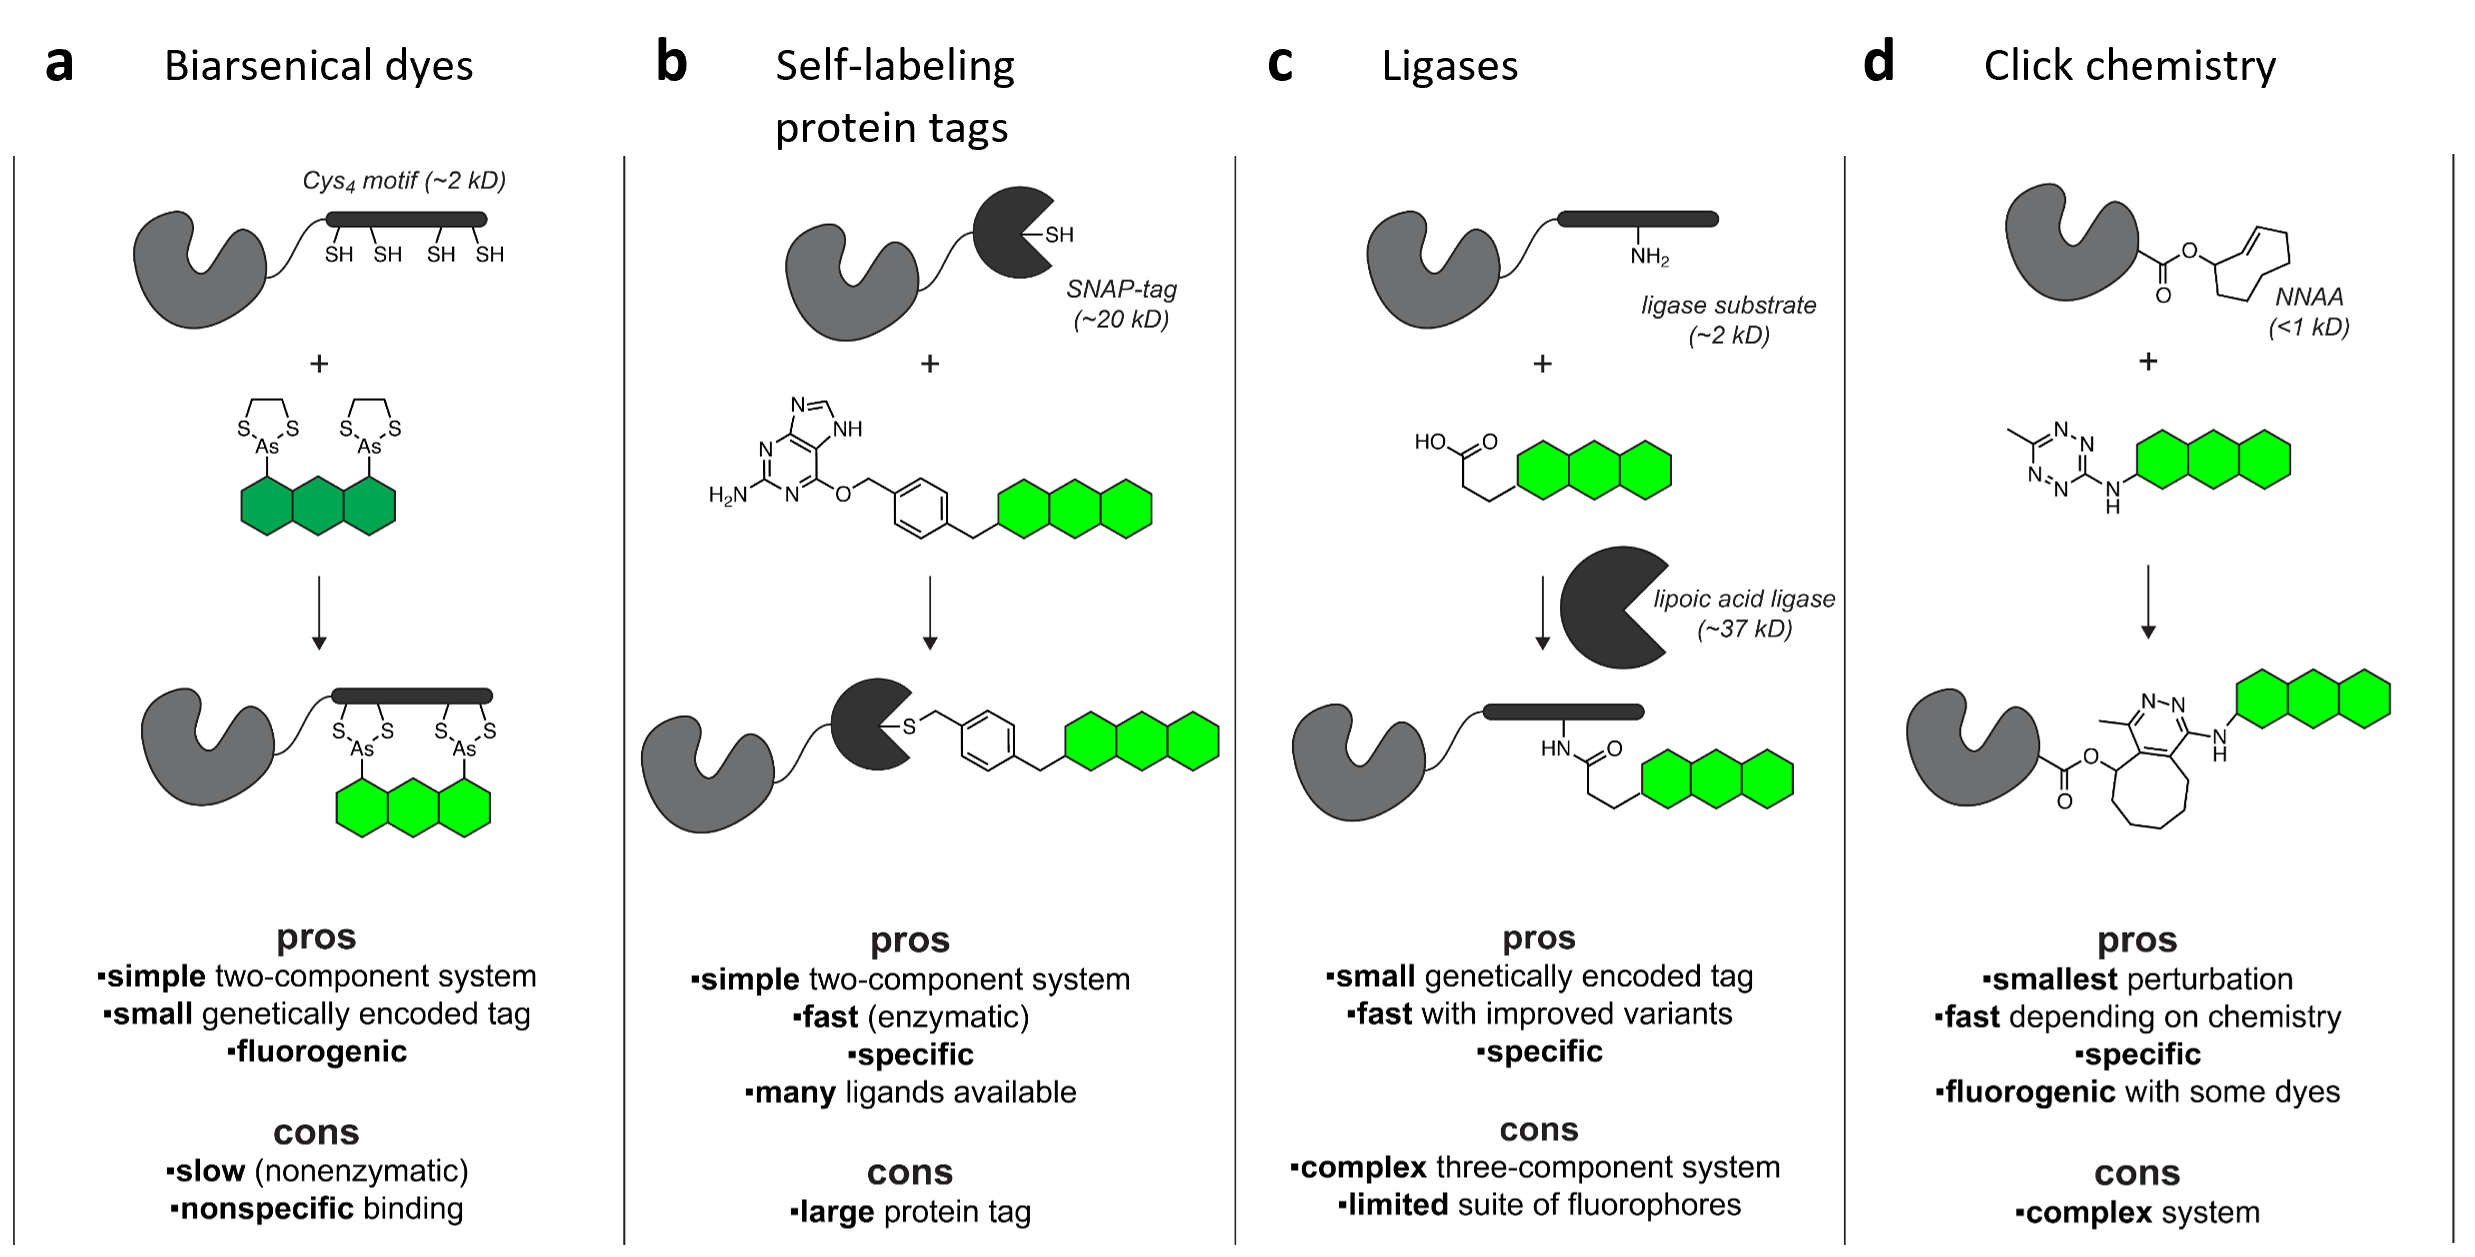 Four schematics of protein labeling strategies with pros and cons list for each. A: Biarsenical dyes. Protein of interest has an added Cys4 motif, shown with a dye molecule that has two arsenic-sulfur moieties. Chemical reaction results in the dye arsenic atoms bound to the Cys sulfurs. Pros include “simple two-component system, small genetically encoded tag, fluorogenic”; cons include “slow (nonenzymatic), nonspecific binding”. B: Self-labeling protein tags. Protein of interest has a SNAP-tag, shown with a benzylguanine ligand. Pros include “simple two-component system, fast (enzymatic), specific, many ligands available”; cons include “large protein tag”. C: Ligases. Protein of interest has a “ligase substrate” peptide motif with a free amine, shown with a ligand with free carboxyl; these are linked by a lipoic acid ligase enzyme. Pros include “small genetically encoded tag, fast with improved variants, specific”; cons include “complex three-component system, limited suite of fluorophores”. D: Click chemistry. Protein of interest has a non-natural amino acid, shown with a tetrazine ligand; these react to form a covalent adduct. Pros include “smallest perturbation, fast (depending on chemistry), specific, fluorogenic with some dyes”; cons include “complex system”.